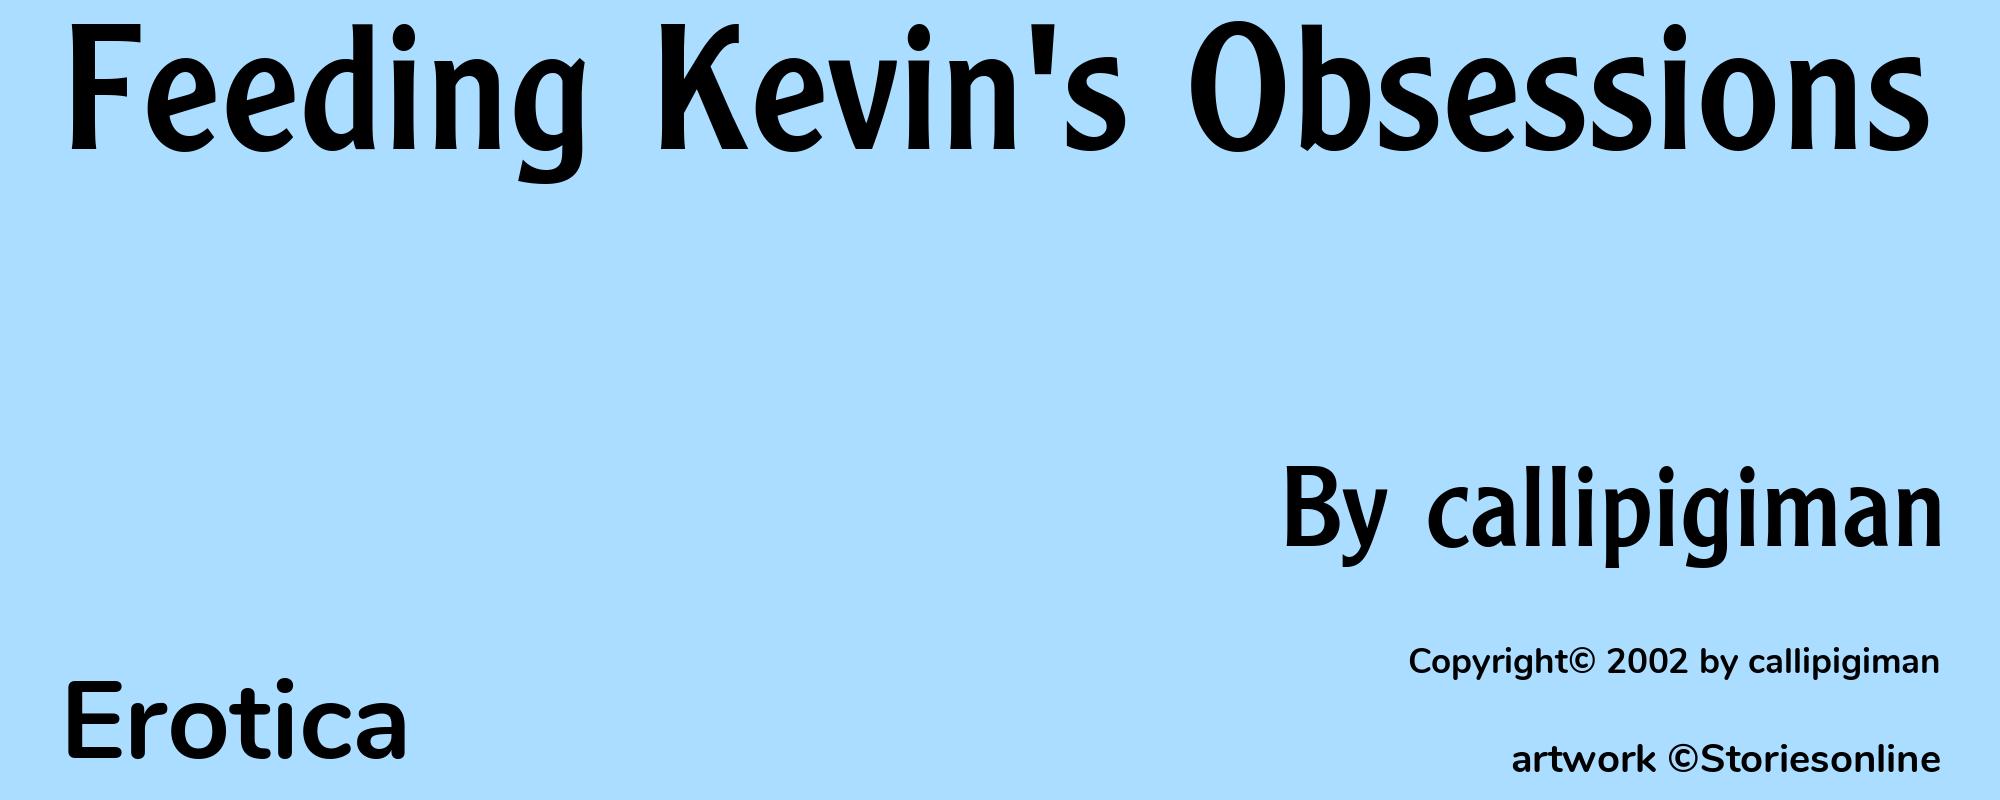 Feeding Kevin's Obsessions - Cover